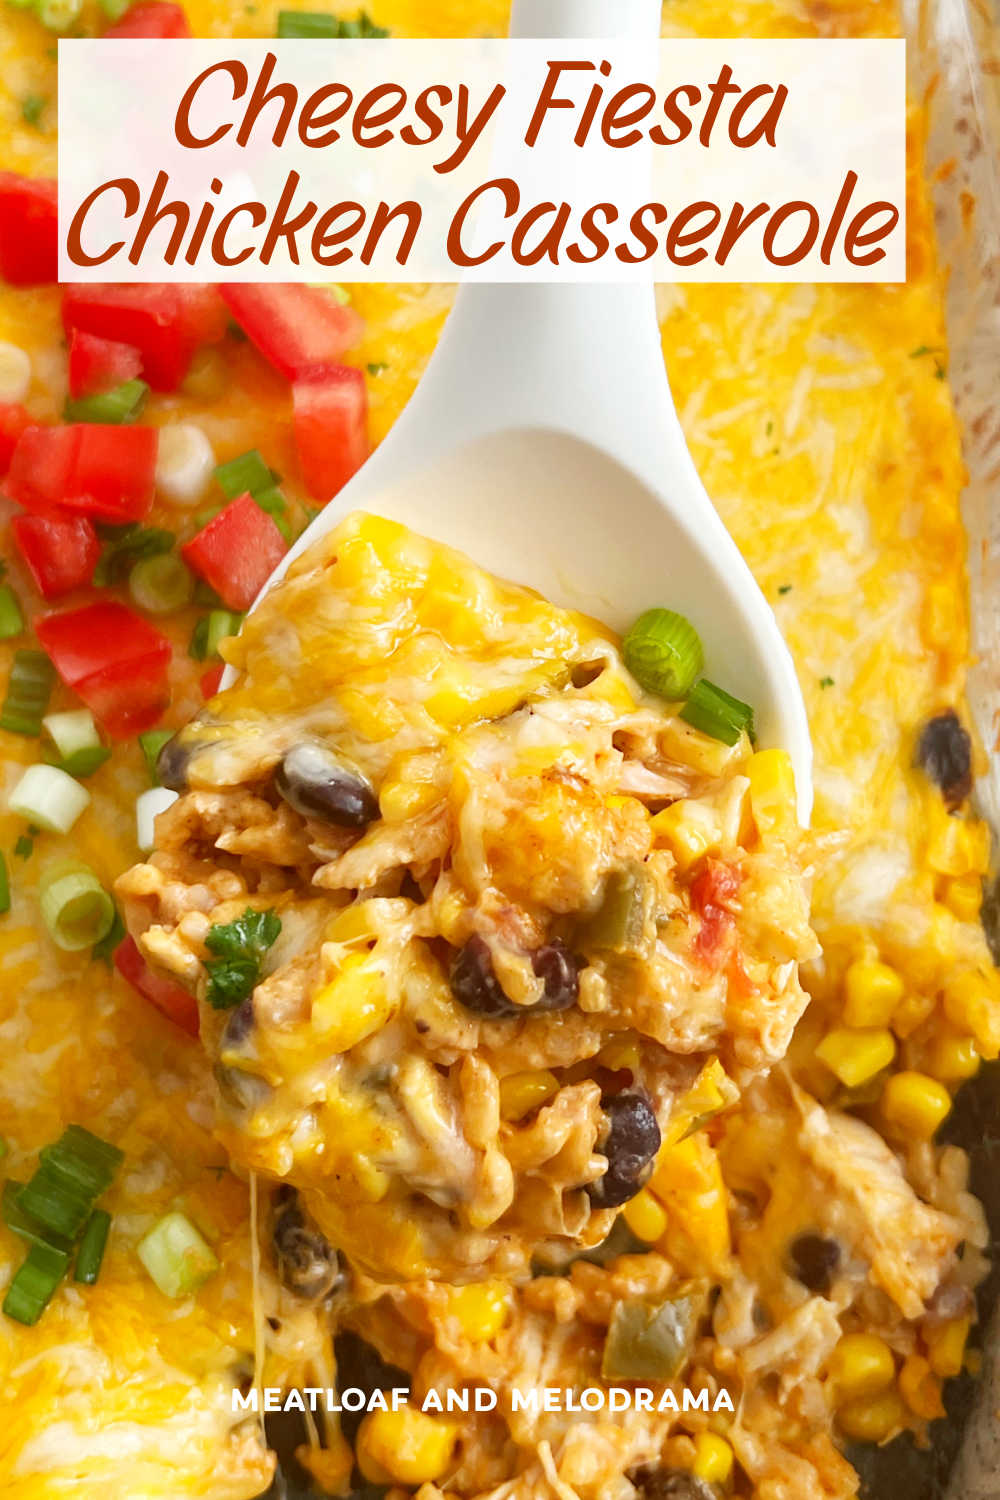 Fiesta Chicken Casserole is an easy chicken casserole recipe with rice, rotisserie chicken, corn, black beans, salsa and lots of cheese. A delicious dinner the whole family loves! via @meamel